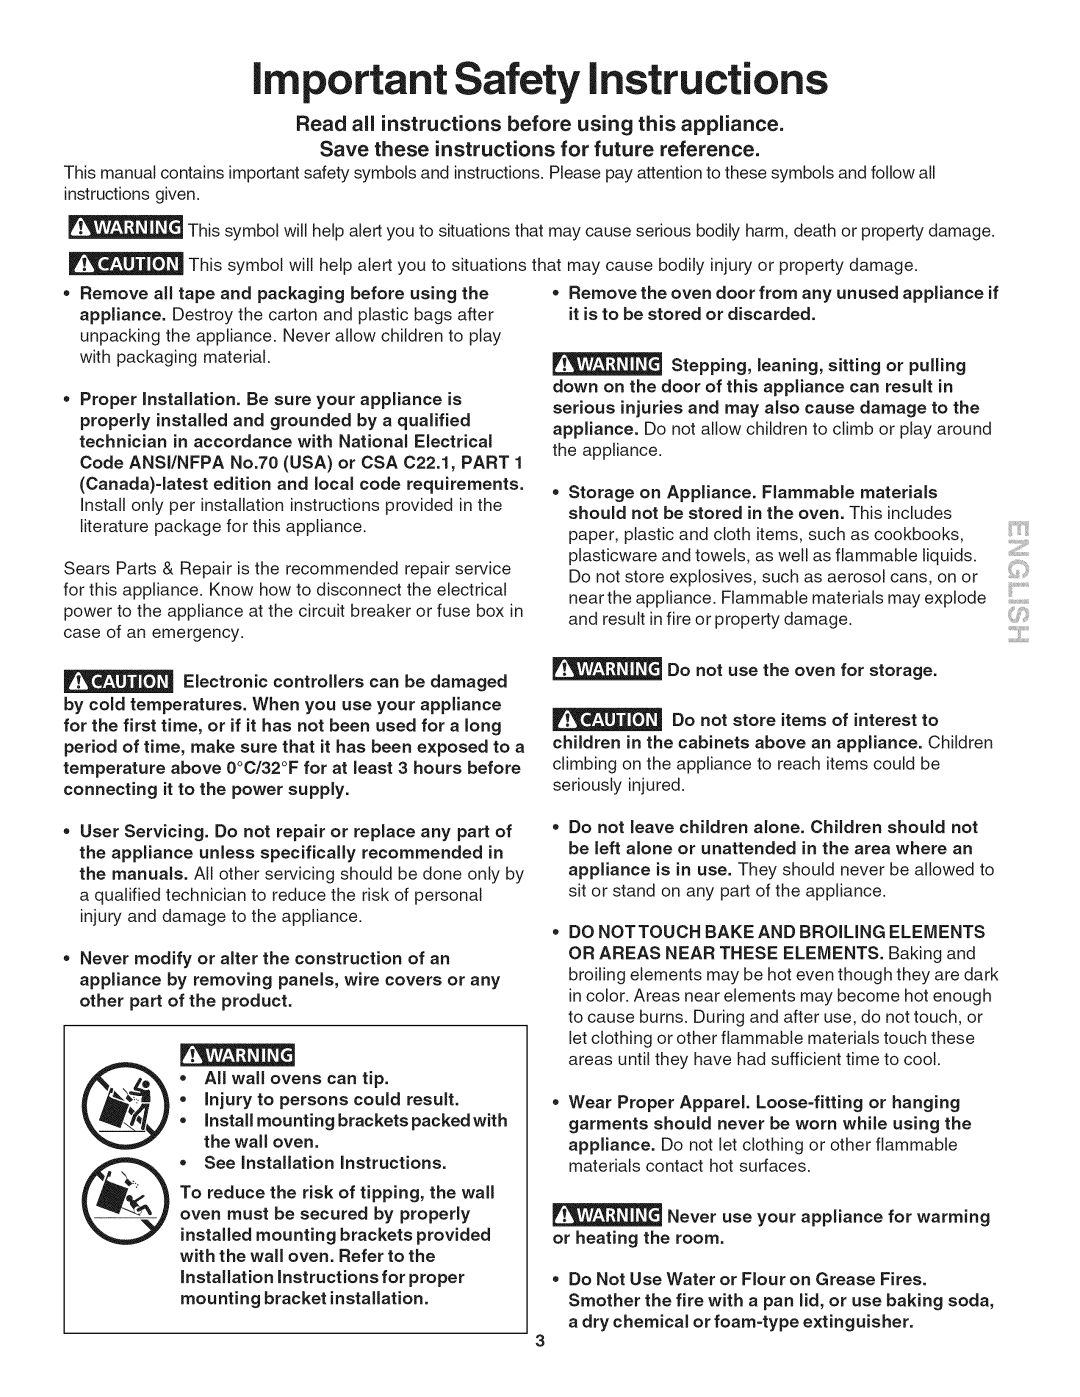 Kenmore 790.4019 manual important Safety instructions, Read all instructions before using this appliance 